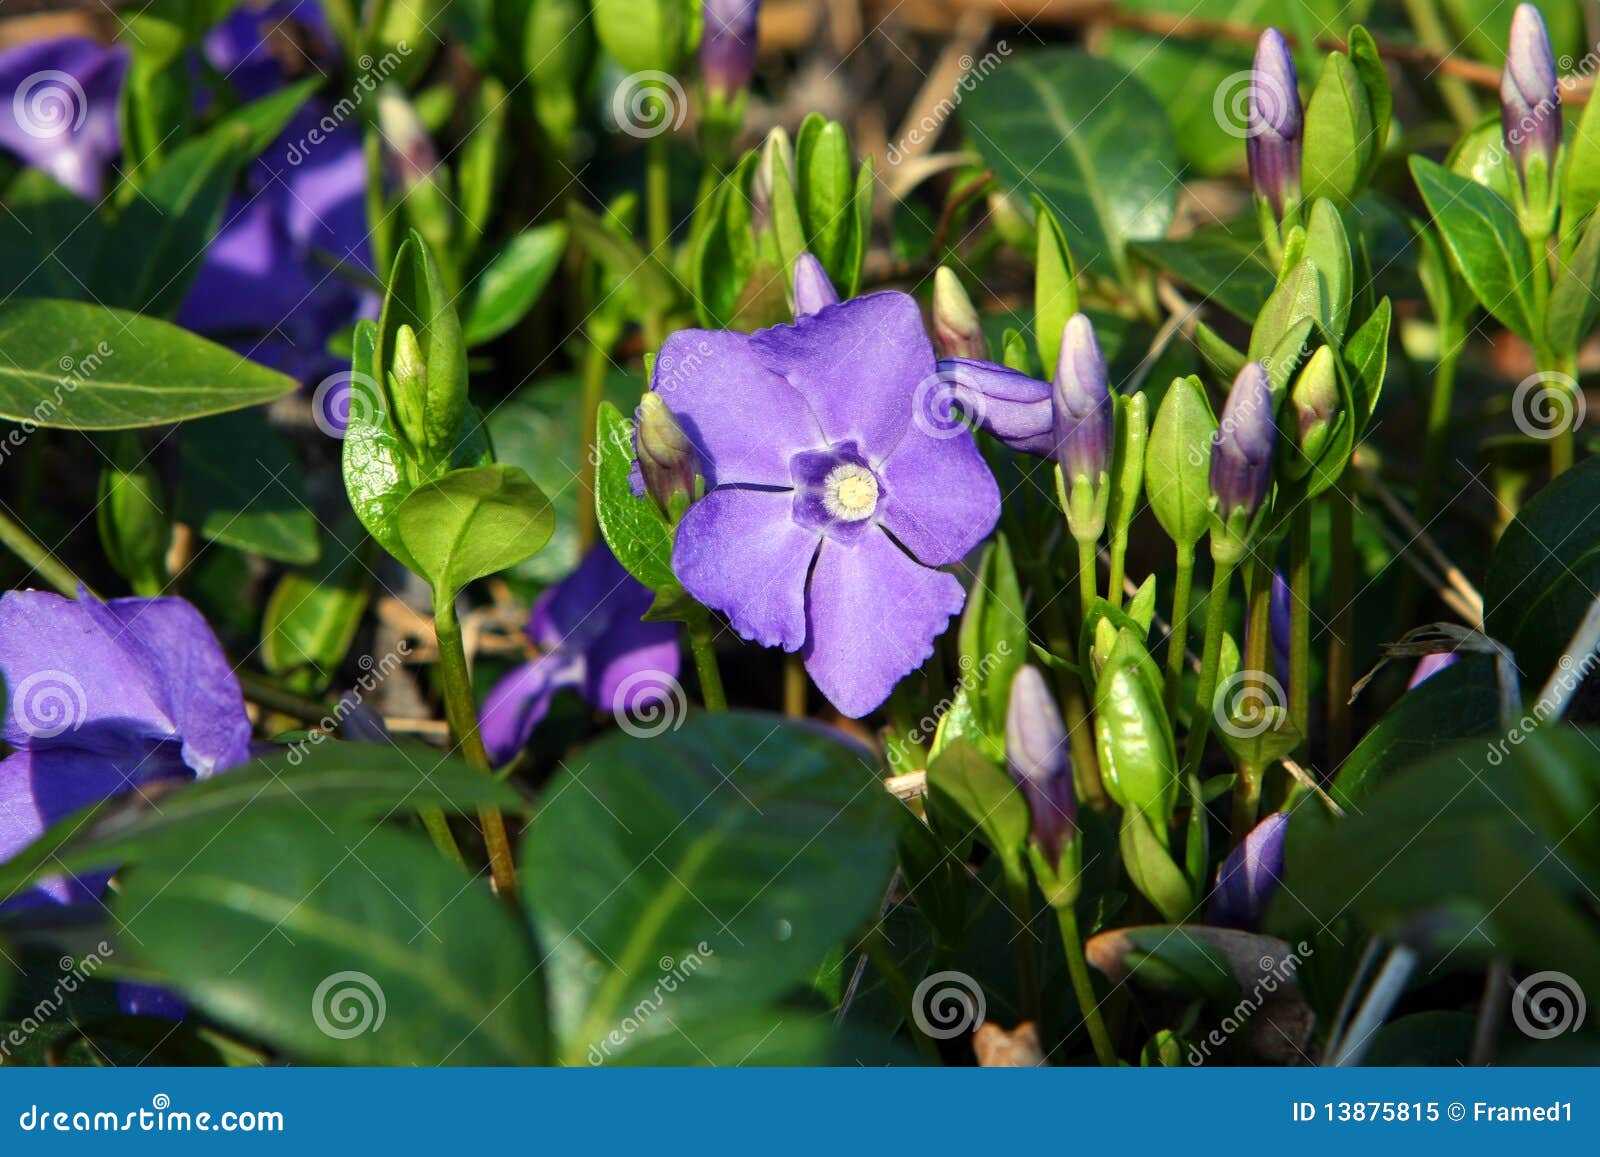 Periwinkle Flower Early Spring In Morning Sun